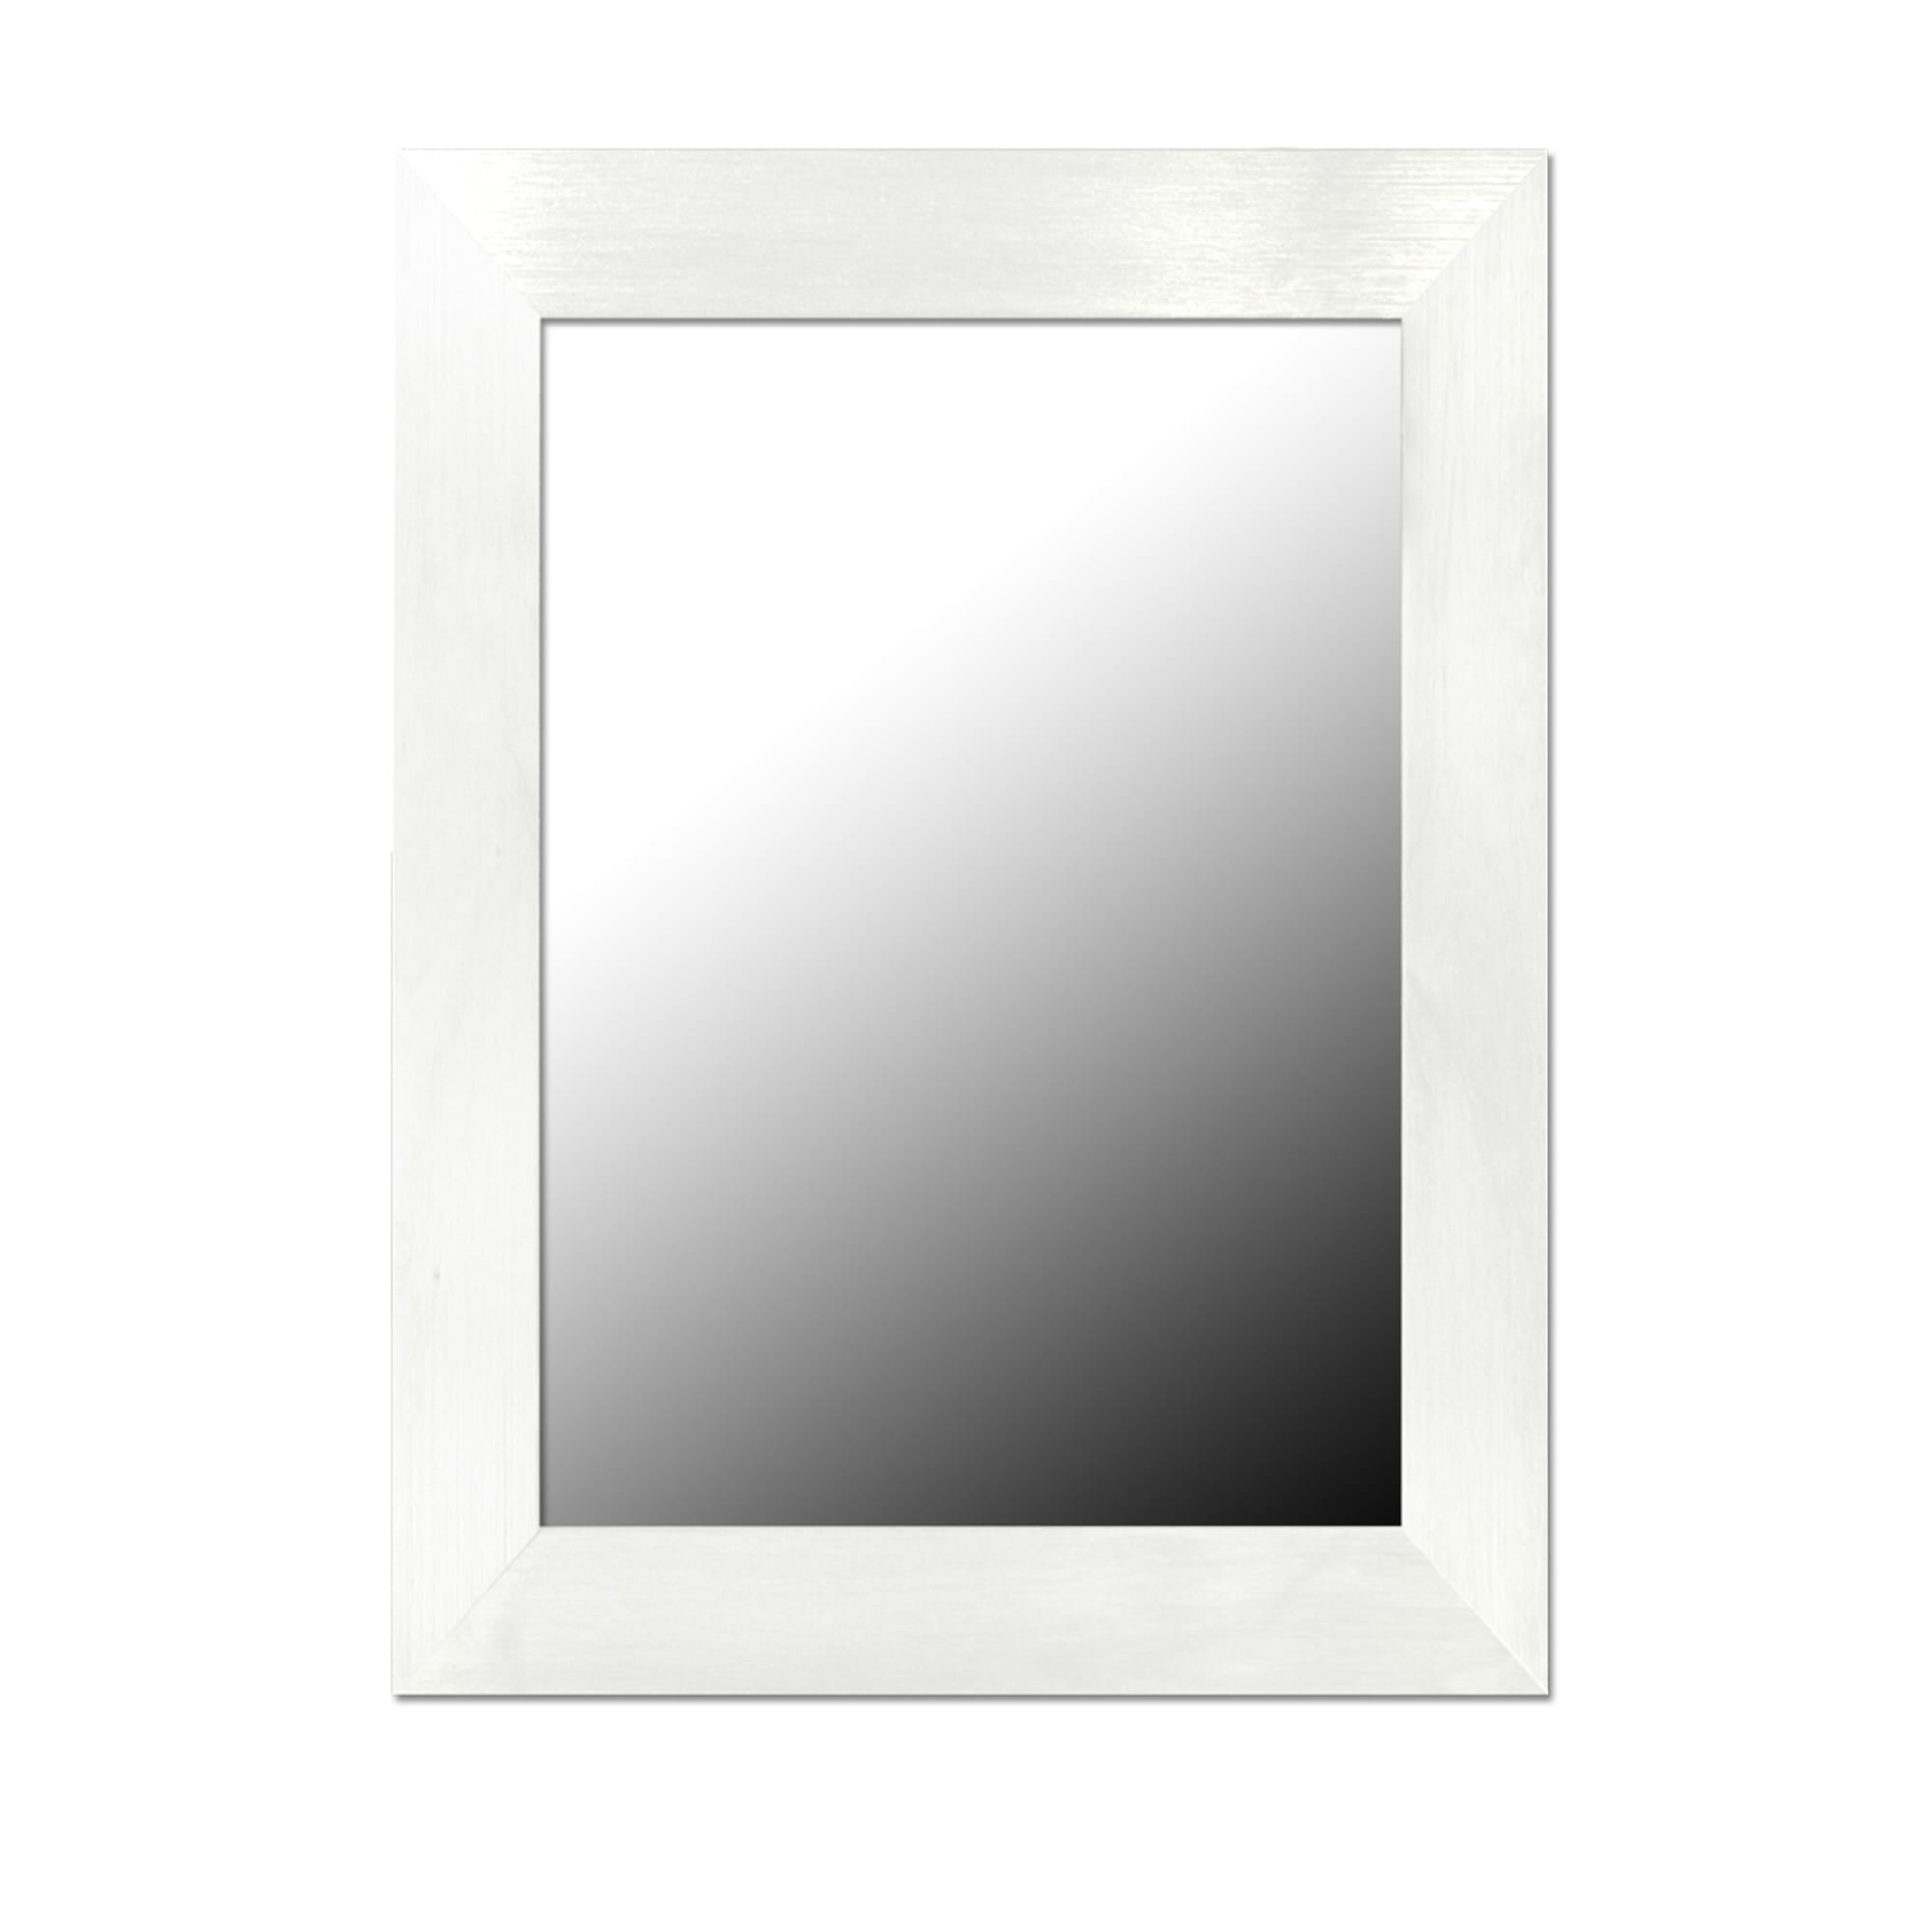 Home Basics Contemporary Rectangle Wall Mirror, White $5.00 EACH, CASE PACK OF 6